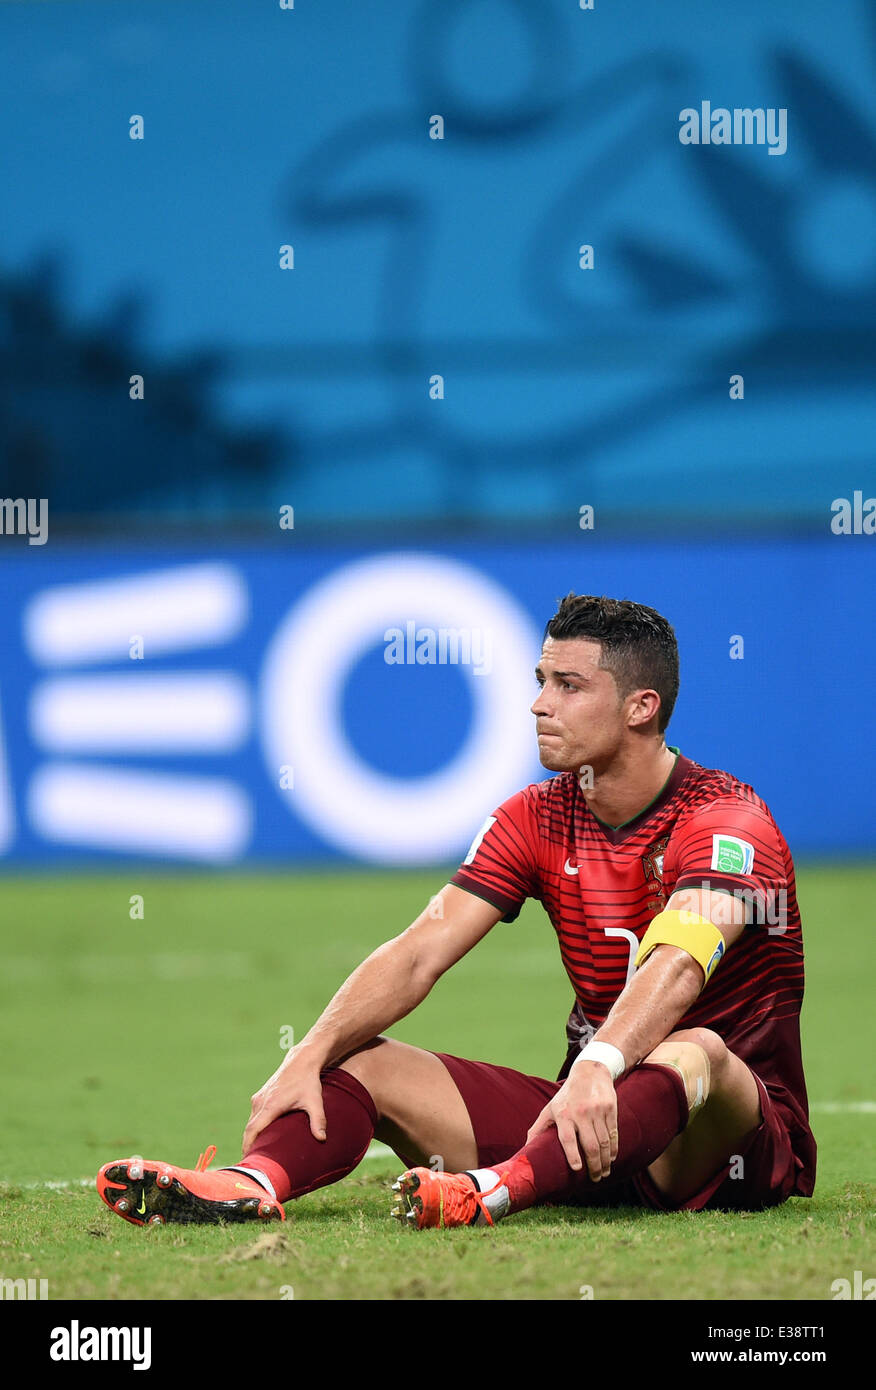 Manaus, Brazil. 22nd June, 2014. Cristiano Ronaldo of Portugal reacts during the FIFA World Cup 2014 group G preliminary round match between the USA and Portugal at the Arena Amazonia Stadium in Manaus, Brazil, 22 June 2014. Photo: Marius Becker/dpa/Alamy Live News Stock Photo